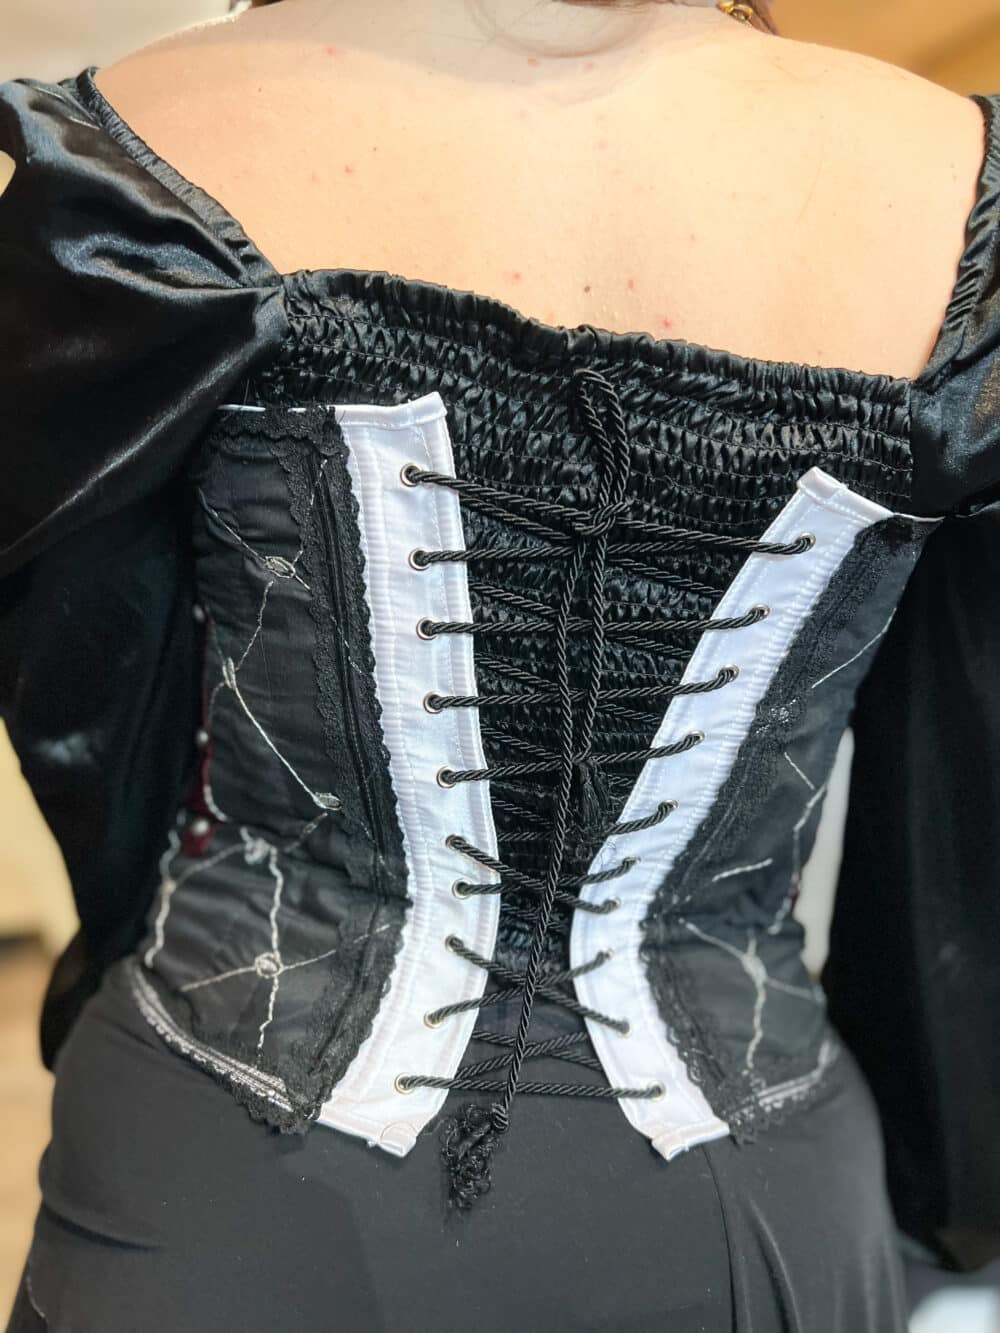 A Victorian Vintage Corset with black textile base, burgundy fabric accents and black lace trim. The corset cinches with black chord.